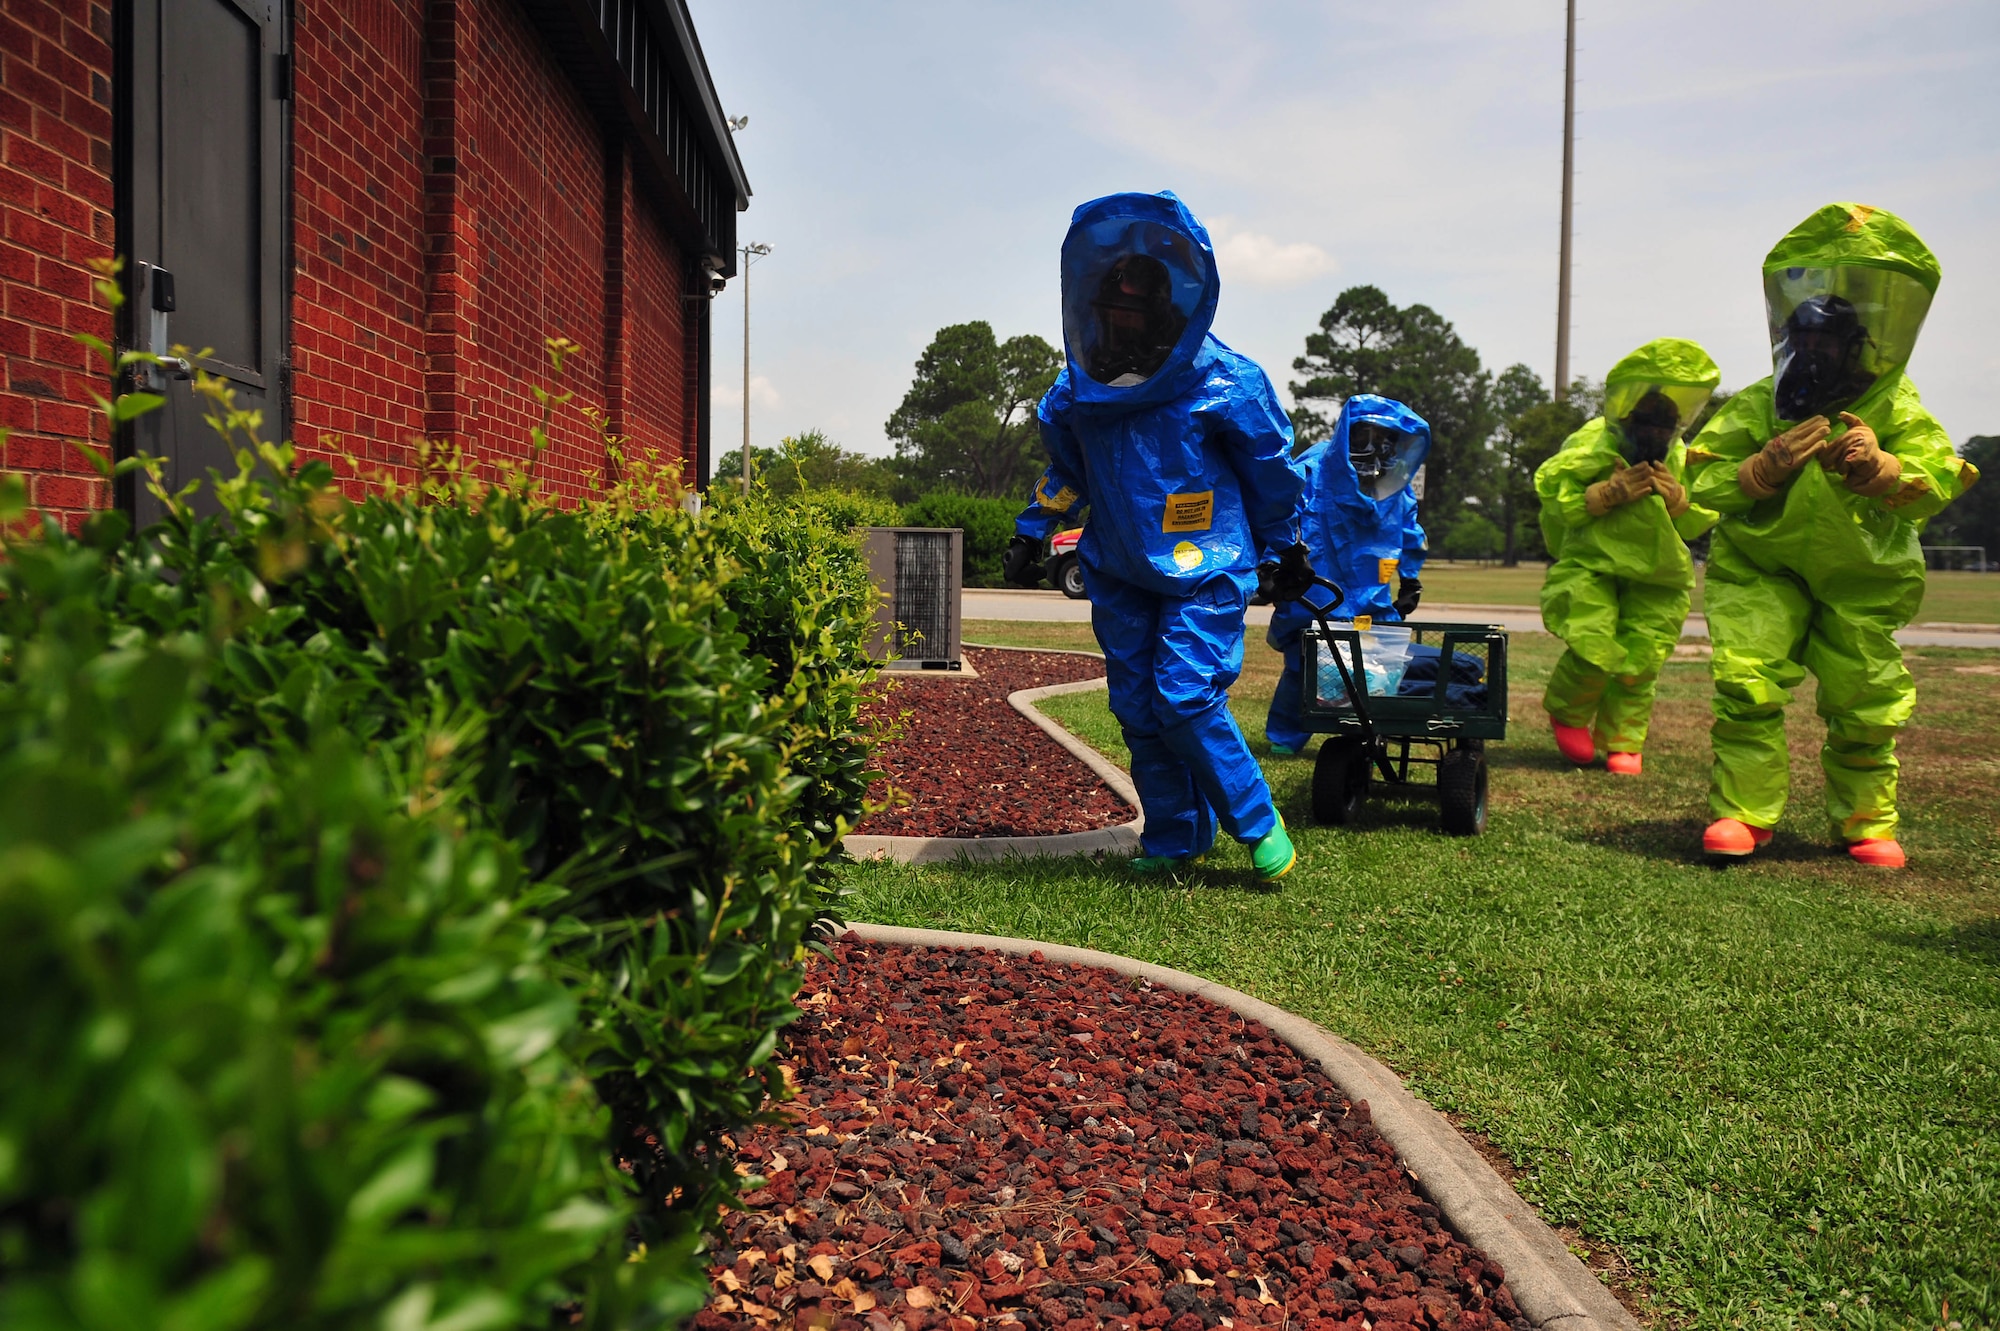 Airmen from the 4th Civil Engineer Squadron emergency management flight and 4th Aerospace Medicine Squadron bioenvironmental flight scout the perimeter of a building during an integrated base emergency response capabilities training exercise, June 24, 2015, at Seymour Johnson Air Force Base, North Carolina. The perimeter was scouted before entry to ensure no simulated hazardous substances were in the area. (U.S. Air Force photo/Senior Airman John Nieves Camacho)